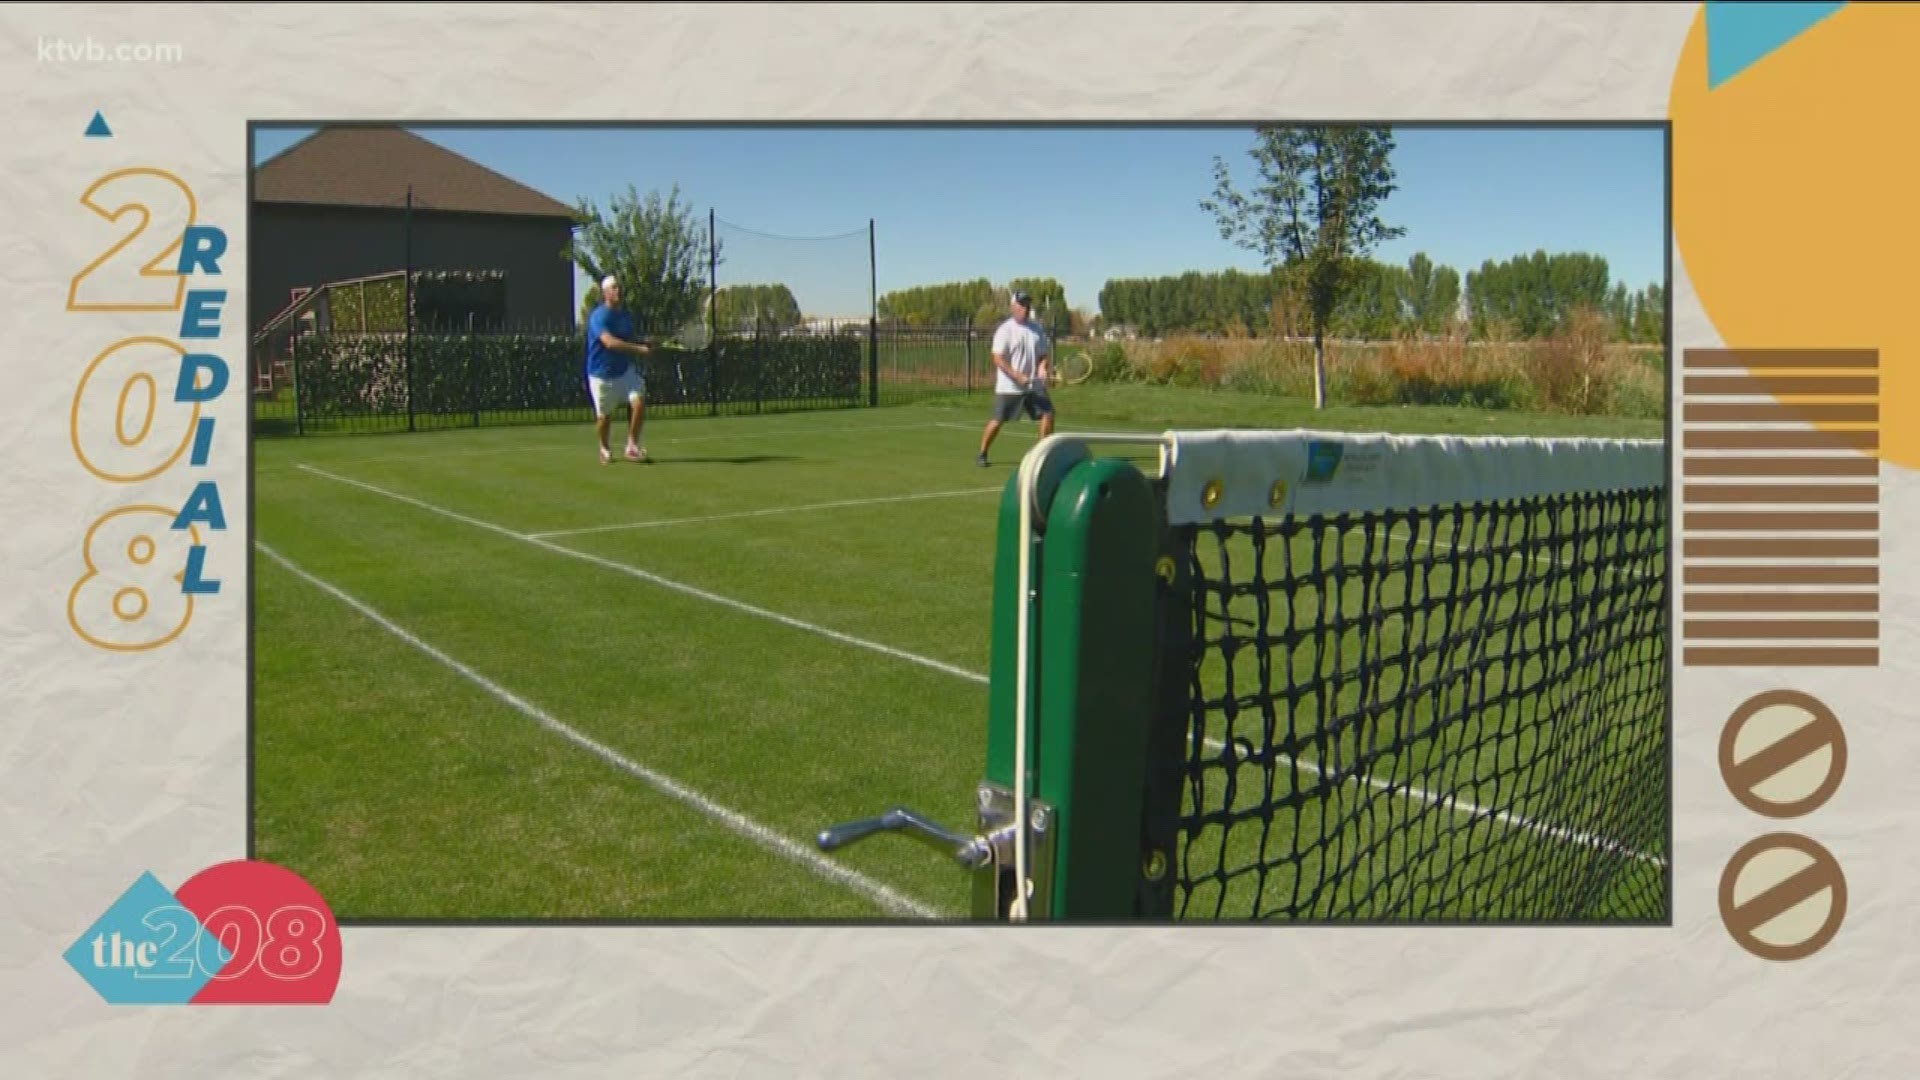 We go back to four years ago when we met Cory Mecham who built a grass tennis court in his backyard.